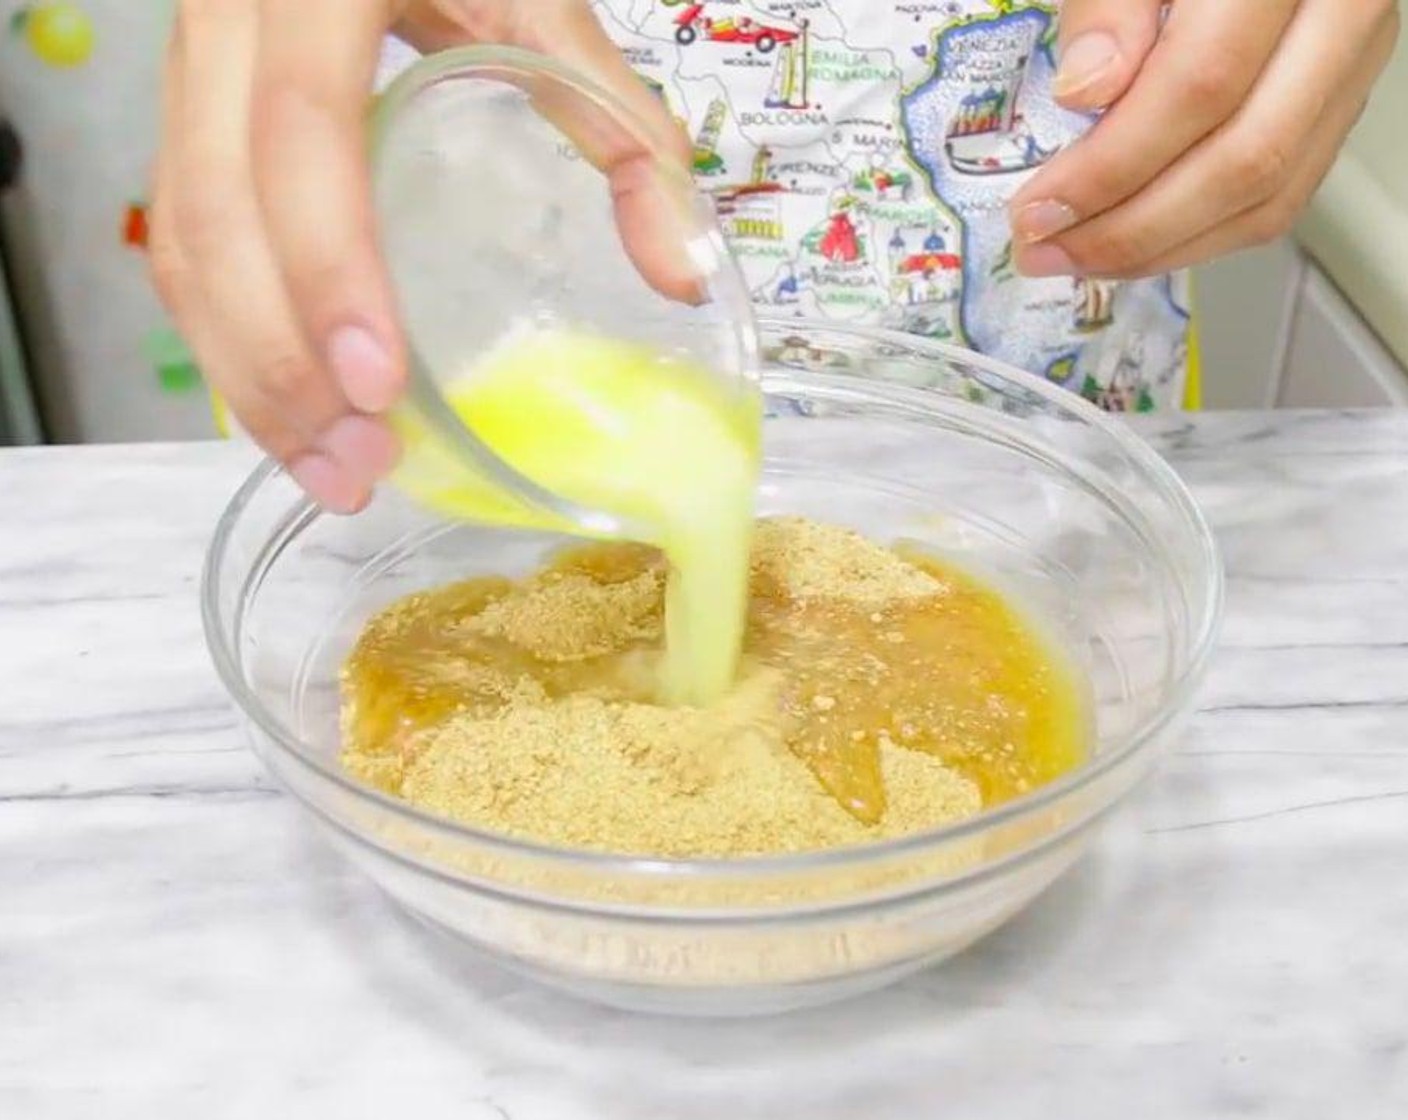 step 3 In a medium size bowl, mix together the Graham Cracker Crumbs (2 cups) and Butter (1/2 cup). Mix until it looks like wet sand.